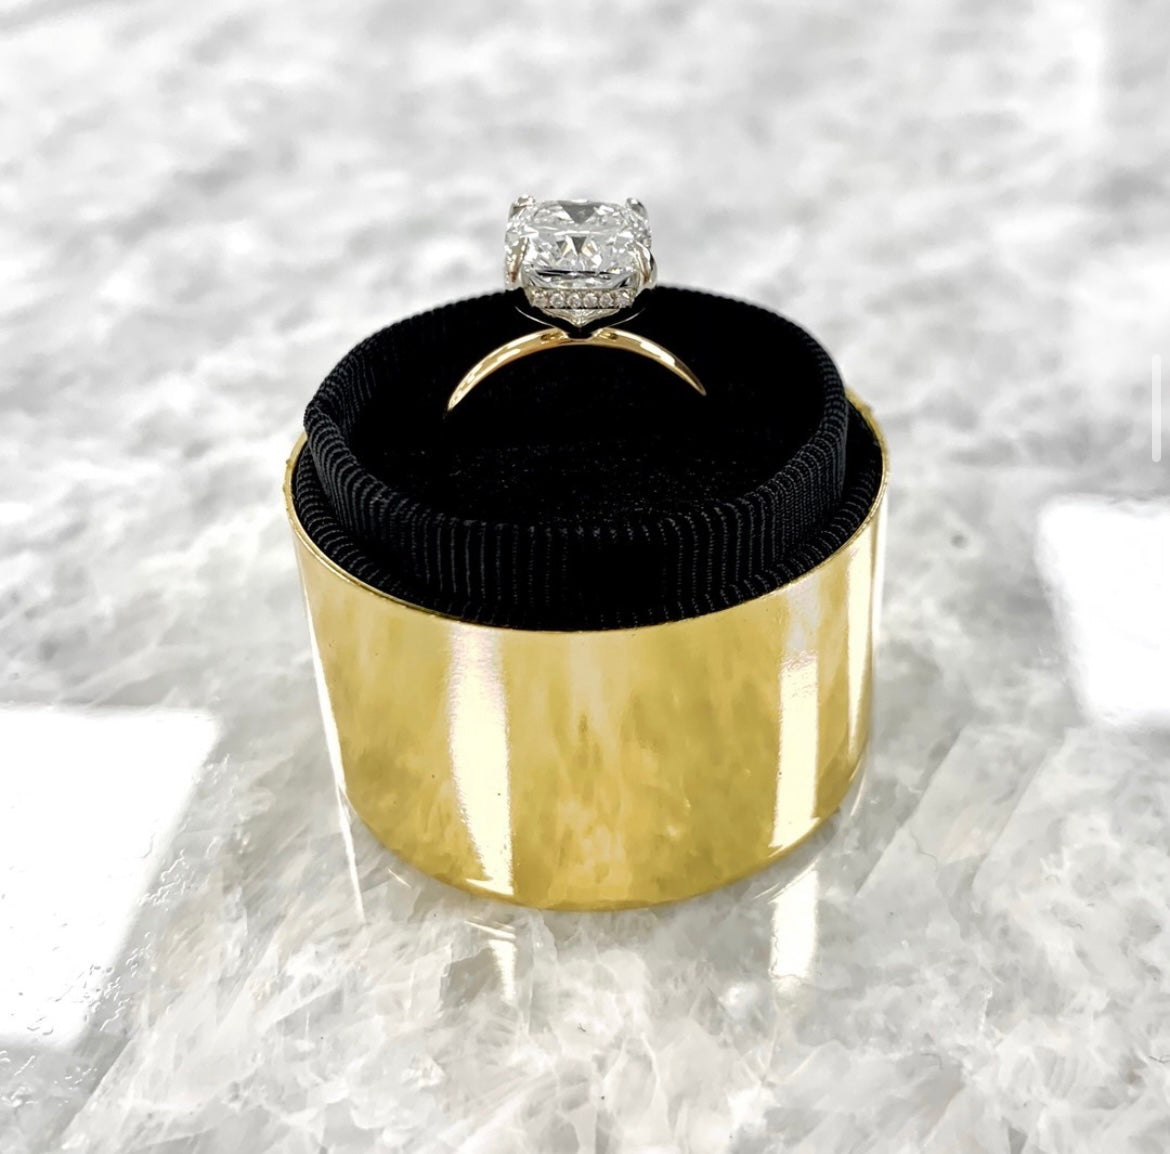 Large Engagement Ring with Hidden Halo Setting in Gold Jewelry Box